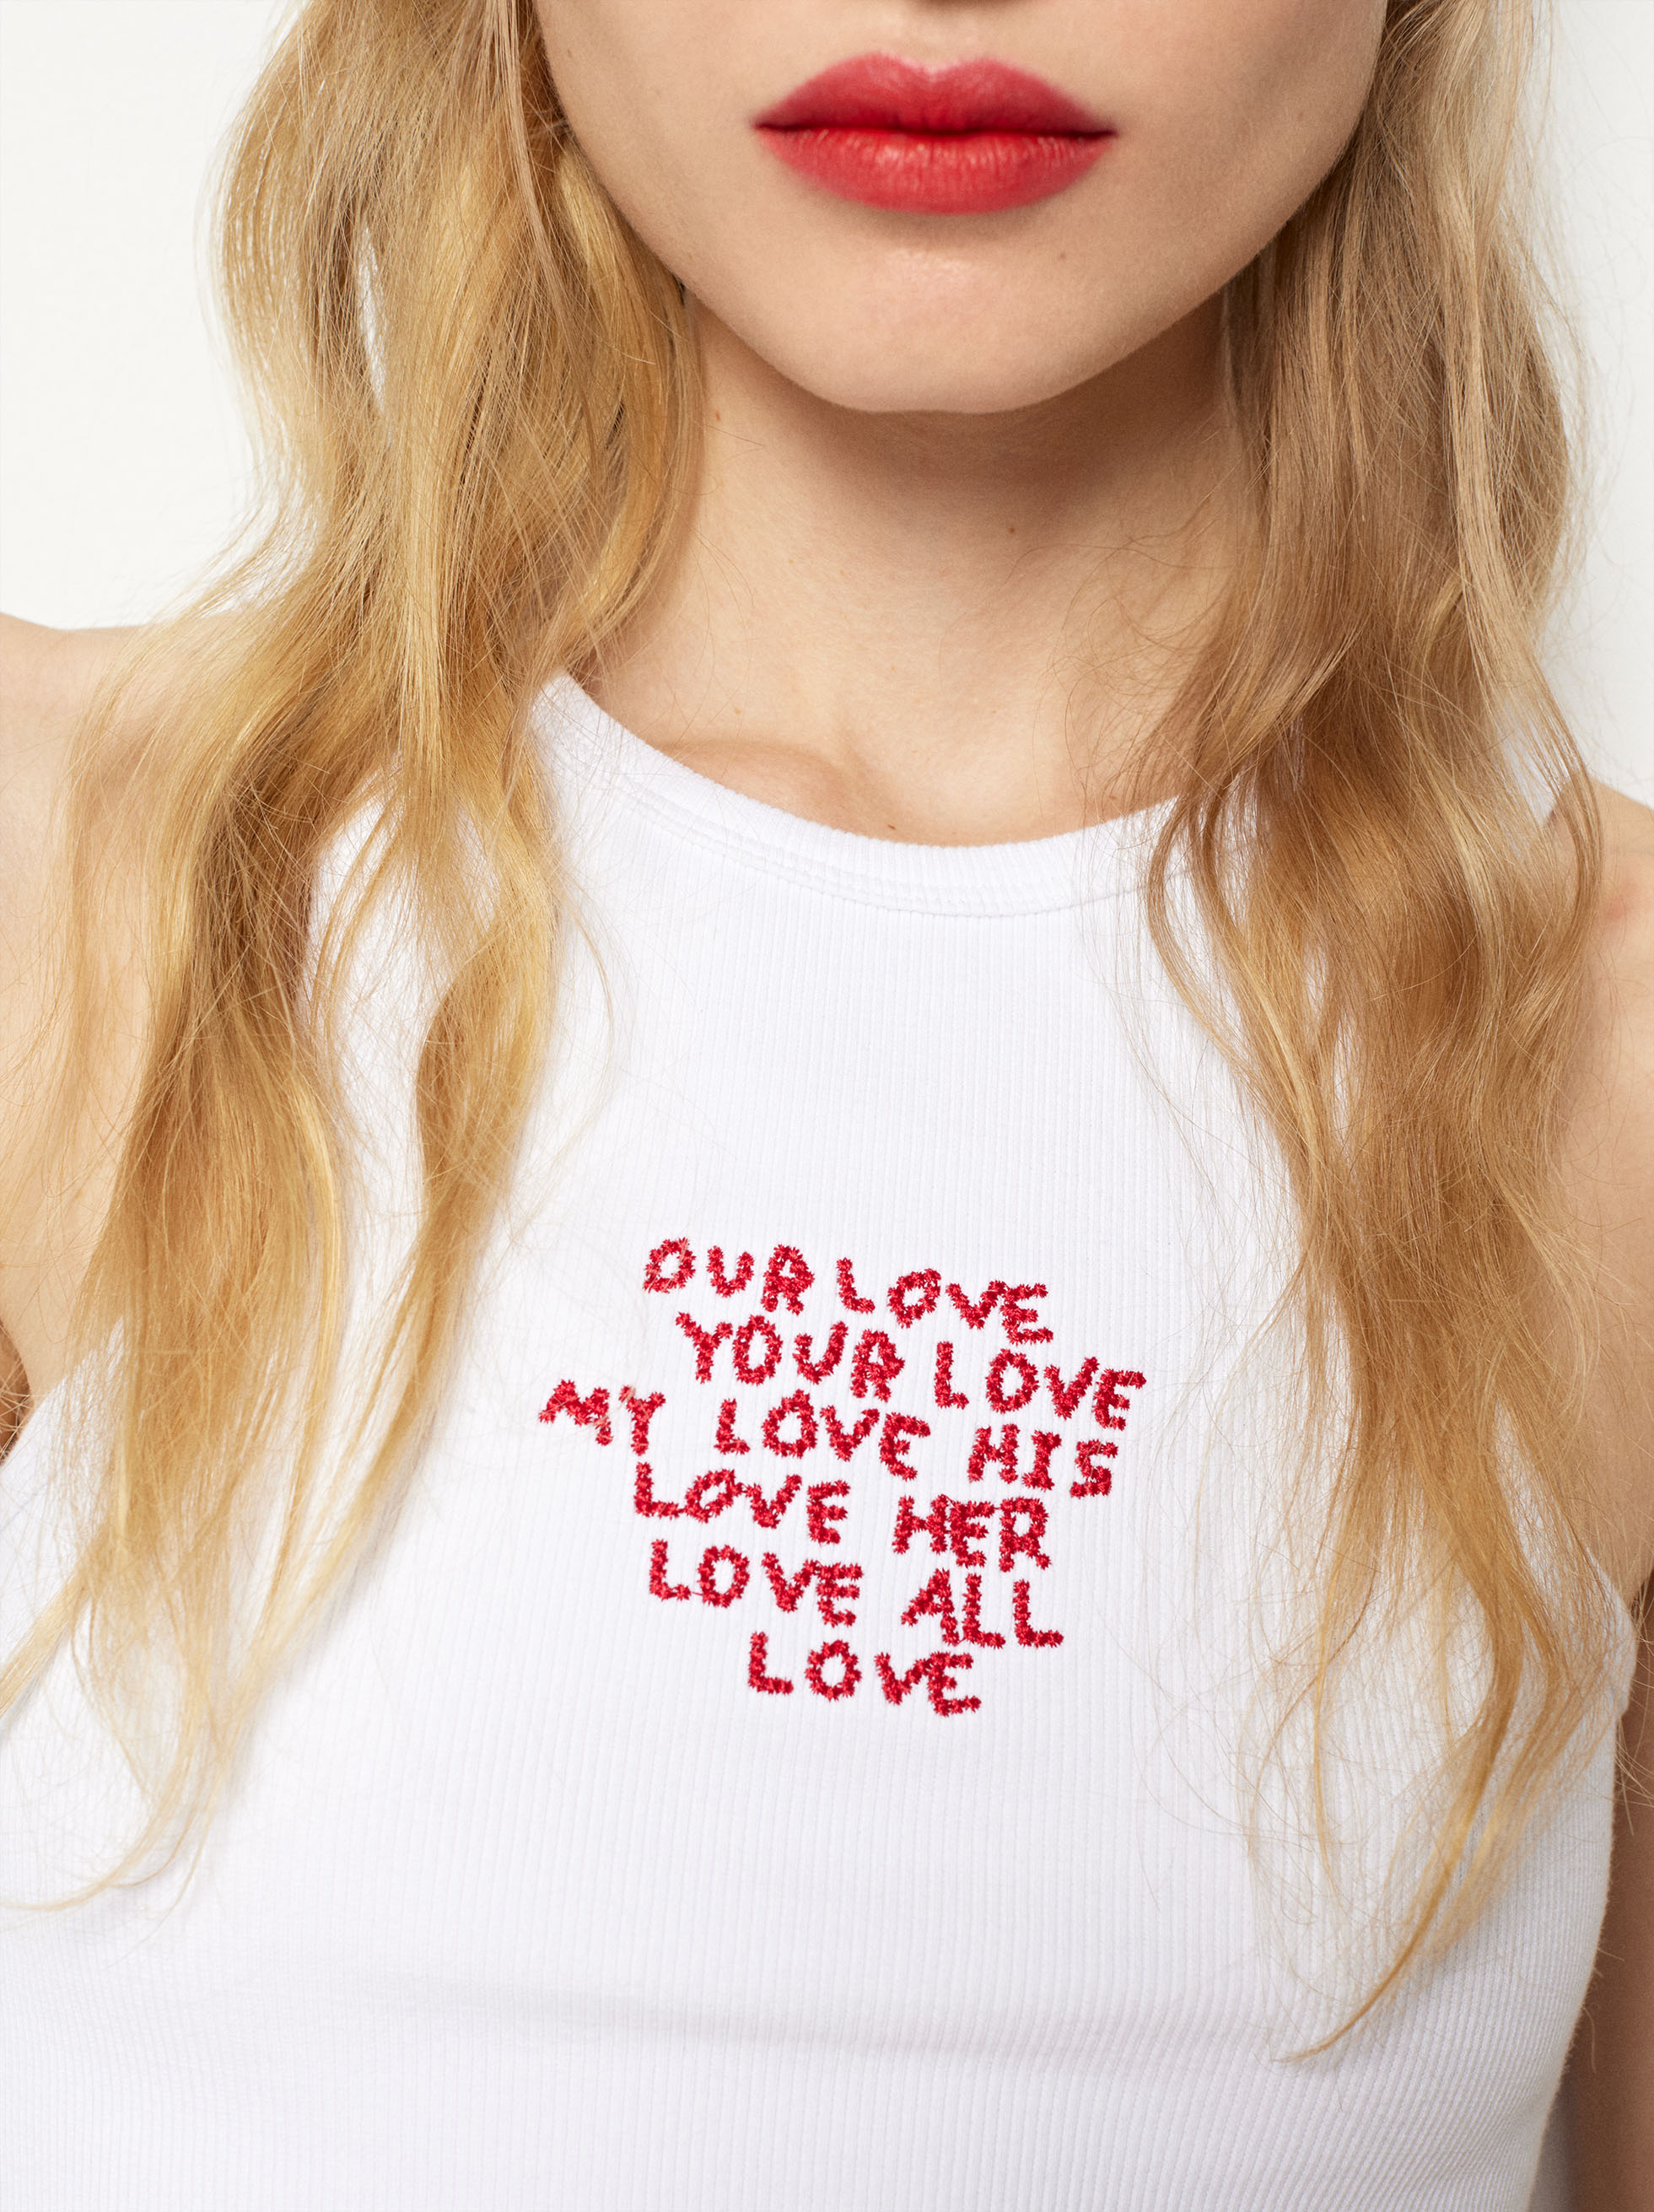 Exclusivo Online - Top Curto Love image number 5.0